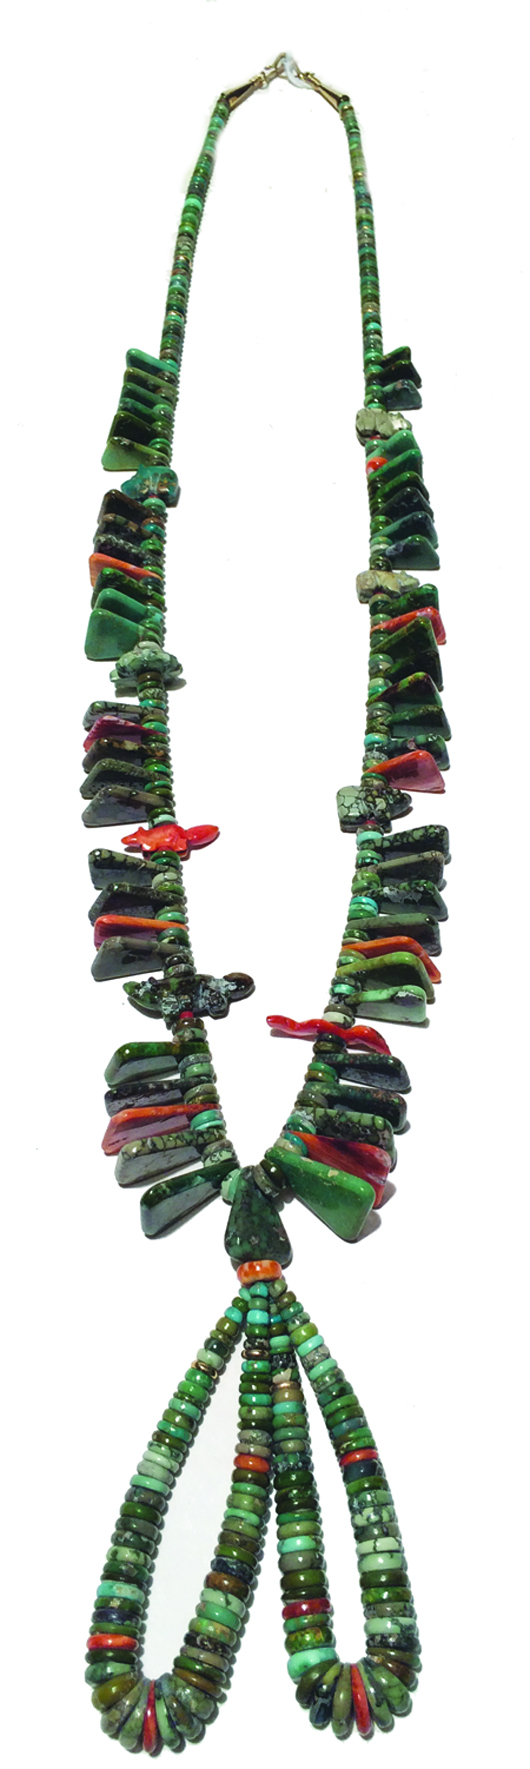 Graduated green turquoise heshi strand fetish necklace with figures, made circa 1960s. Price realized: $2,875. Allard Auctions Inc. image.